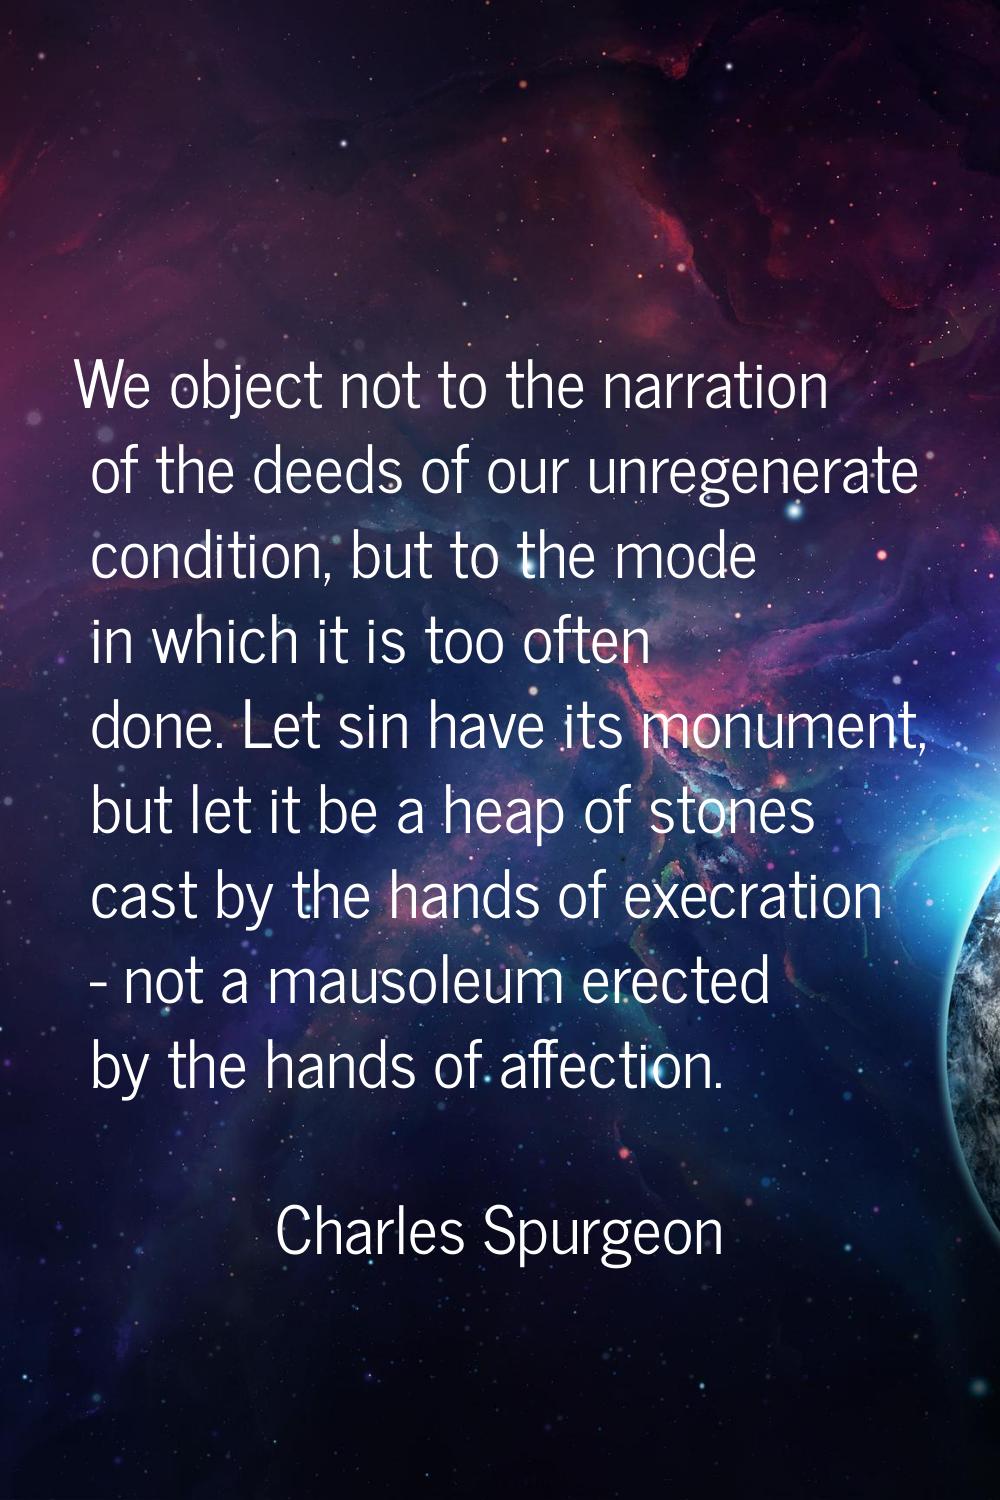 We object not to the narration of the deeds of our unregenerate condition, but to the mode in which